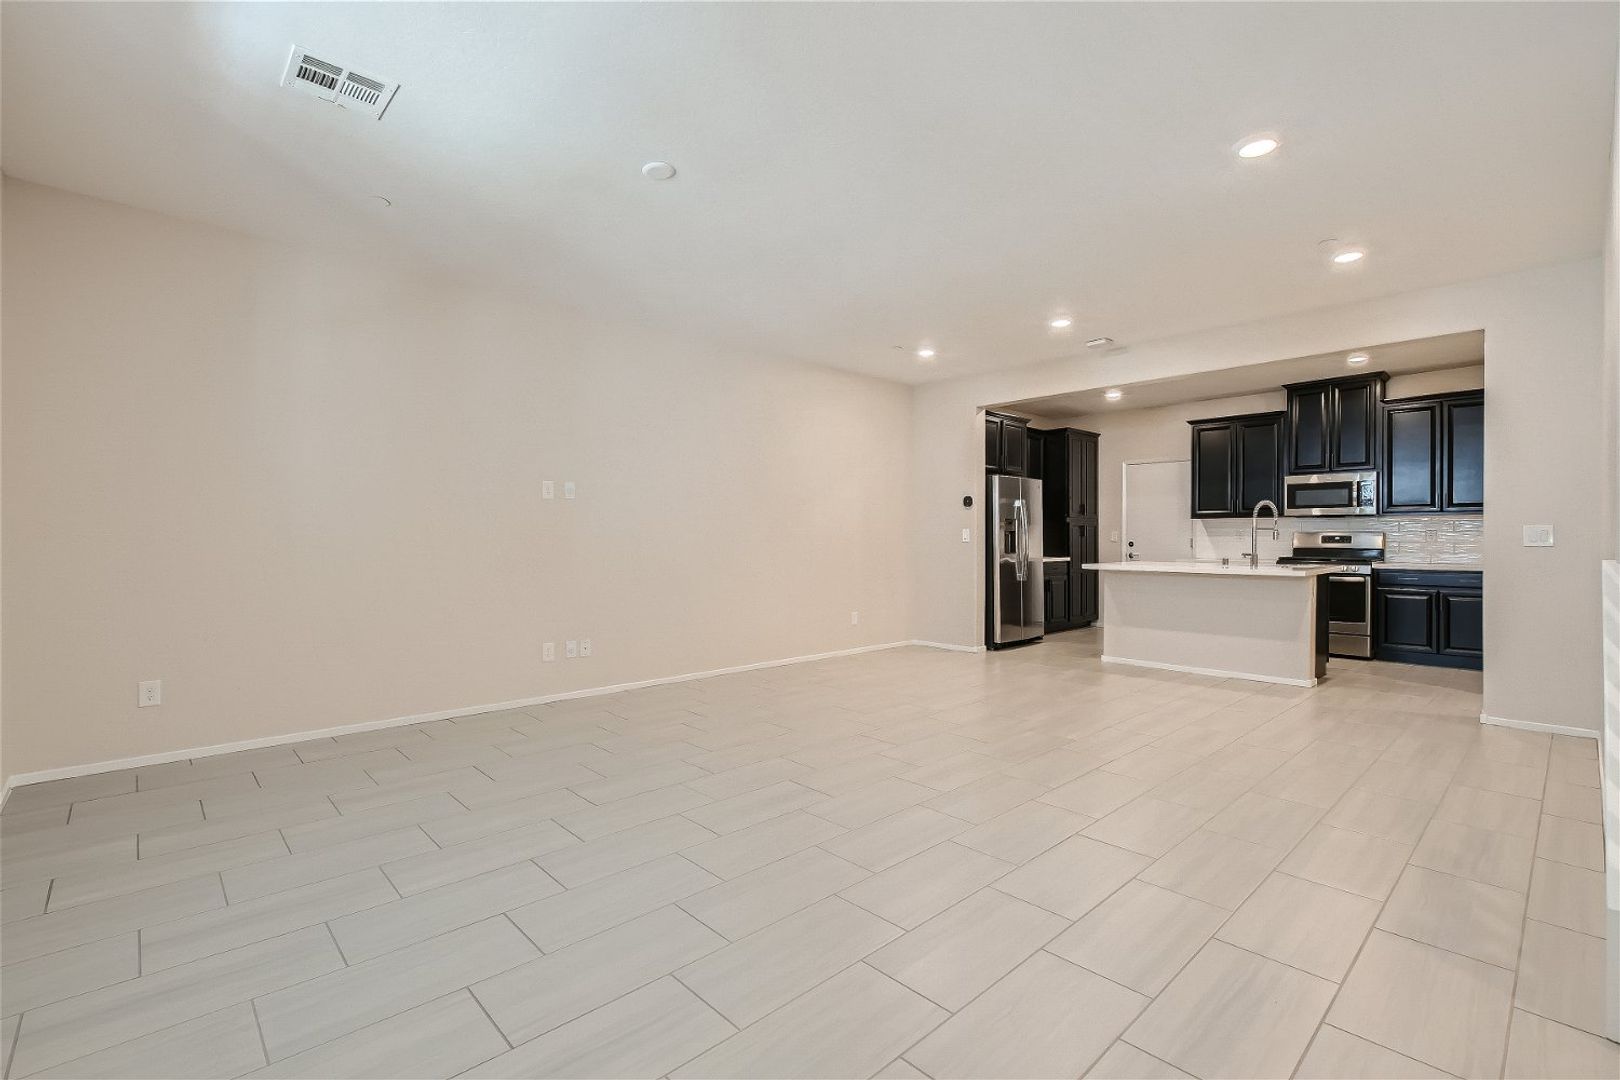 Breathtaking Summerlin Condo in Gated Community with Rooftop Deck & Community Pool!